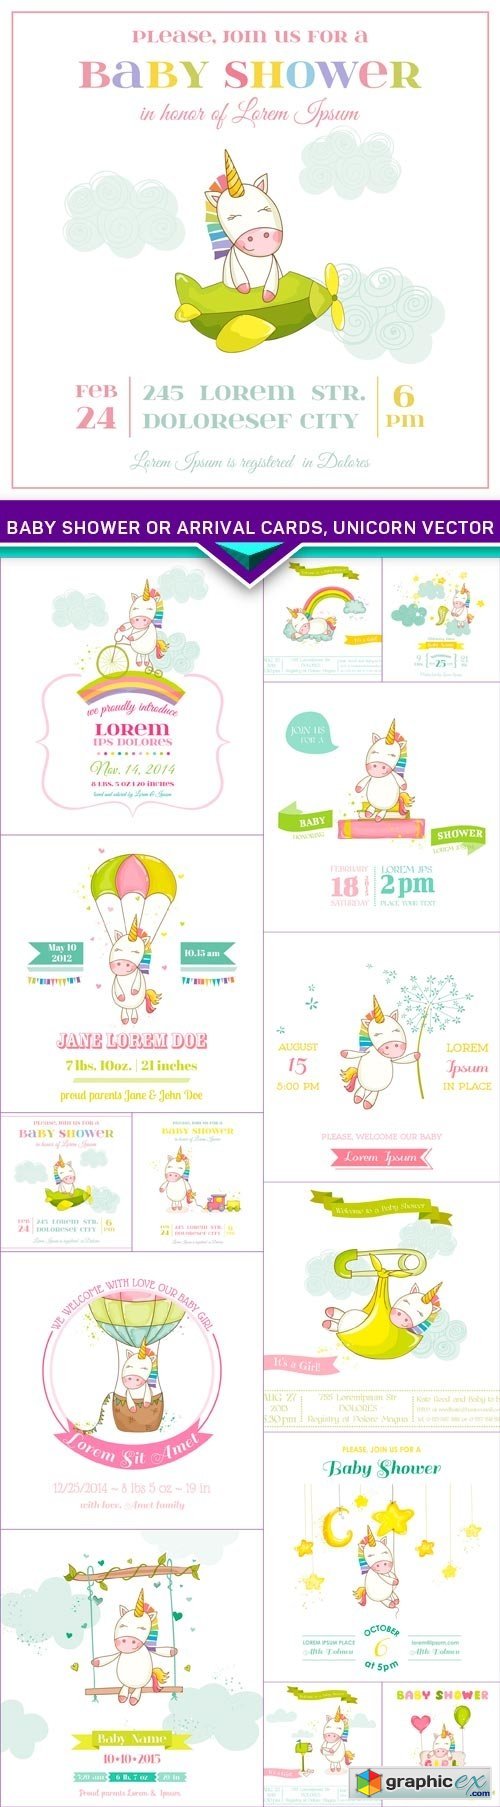 Baby Shower or Arrival Cards, unicorn vector 14x EPS